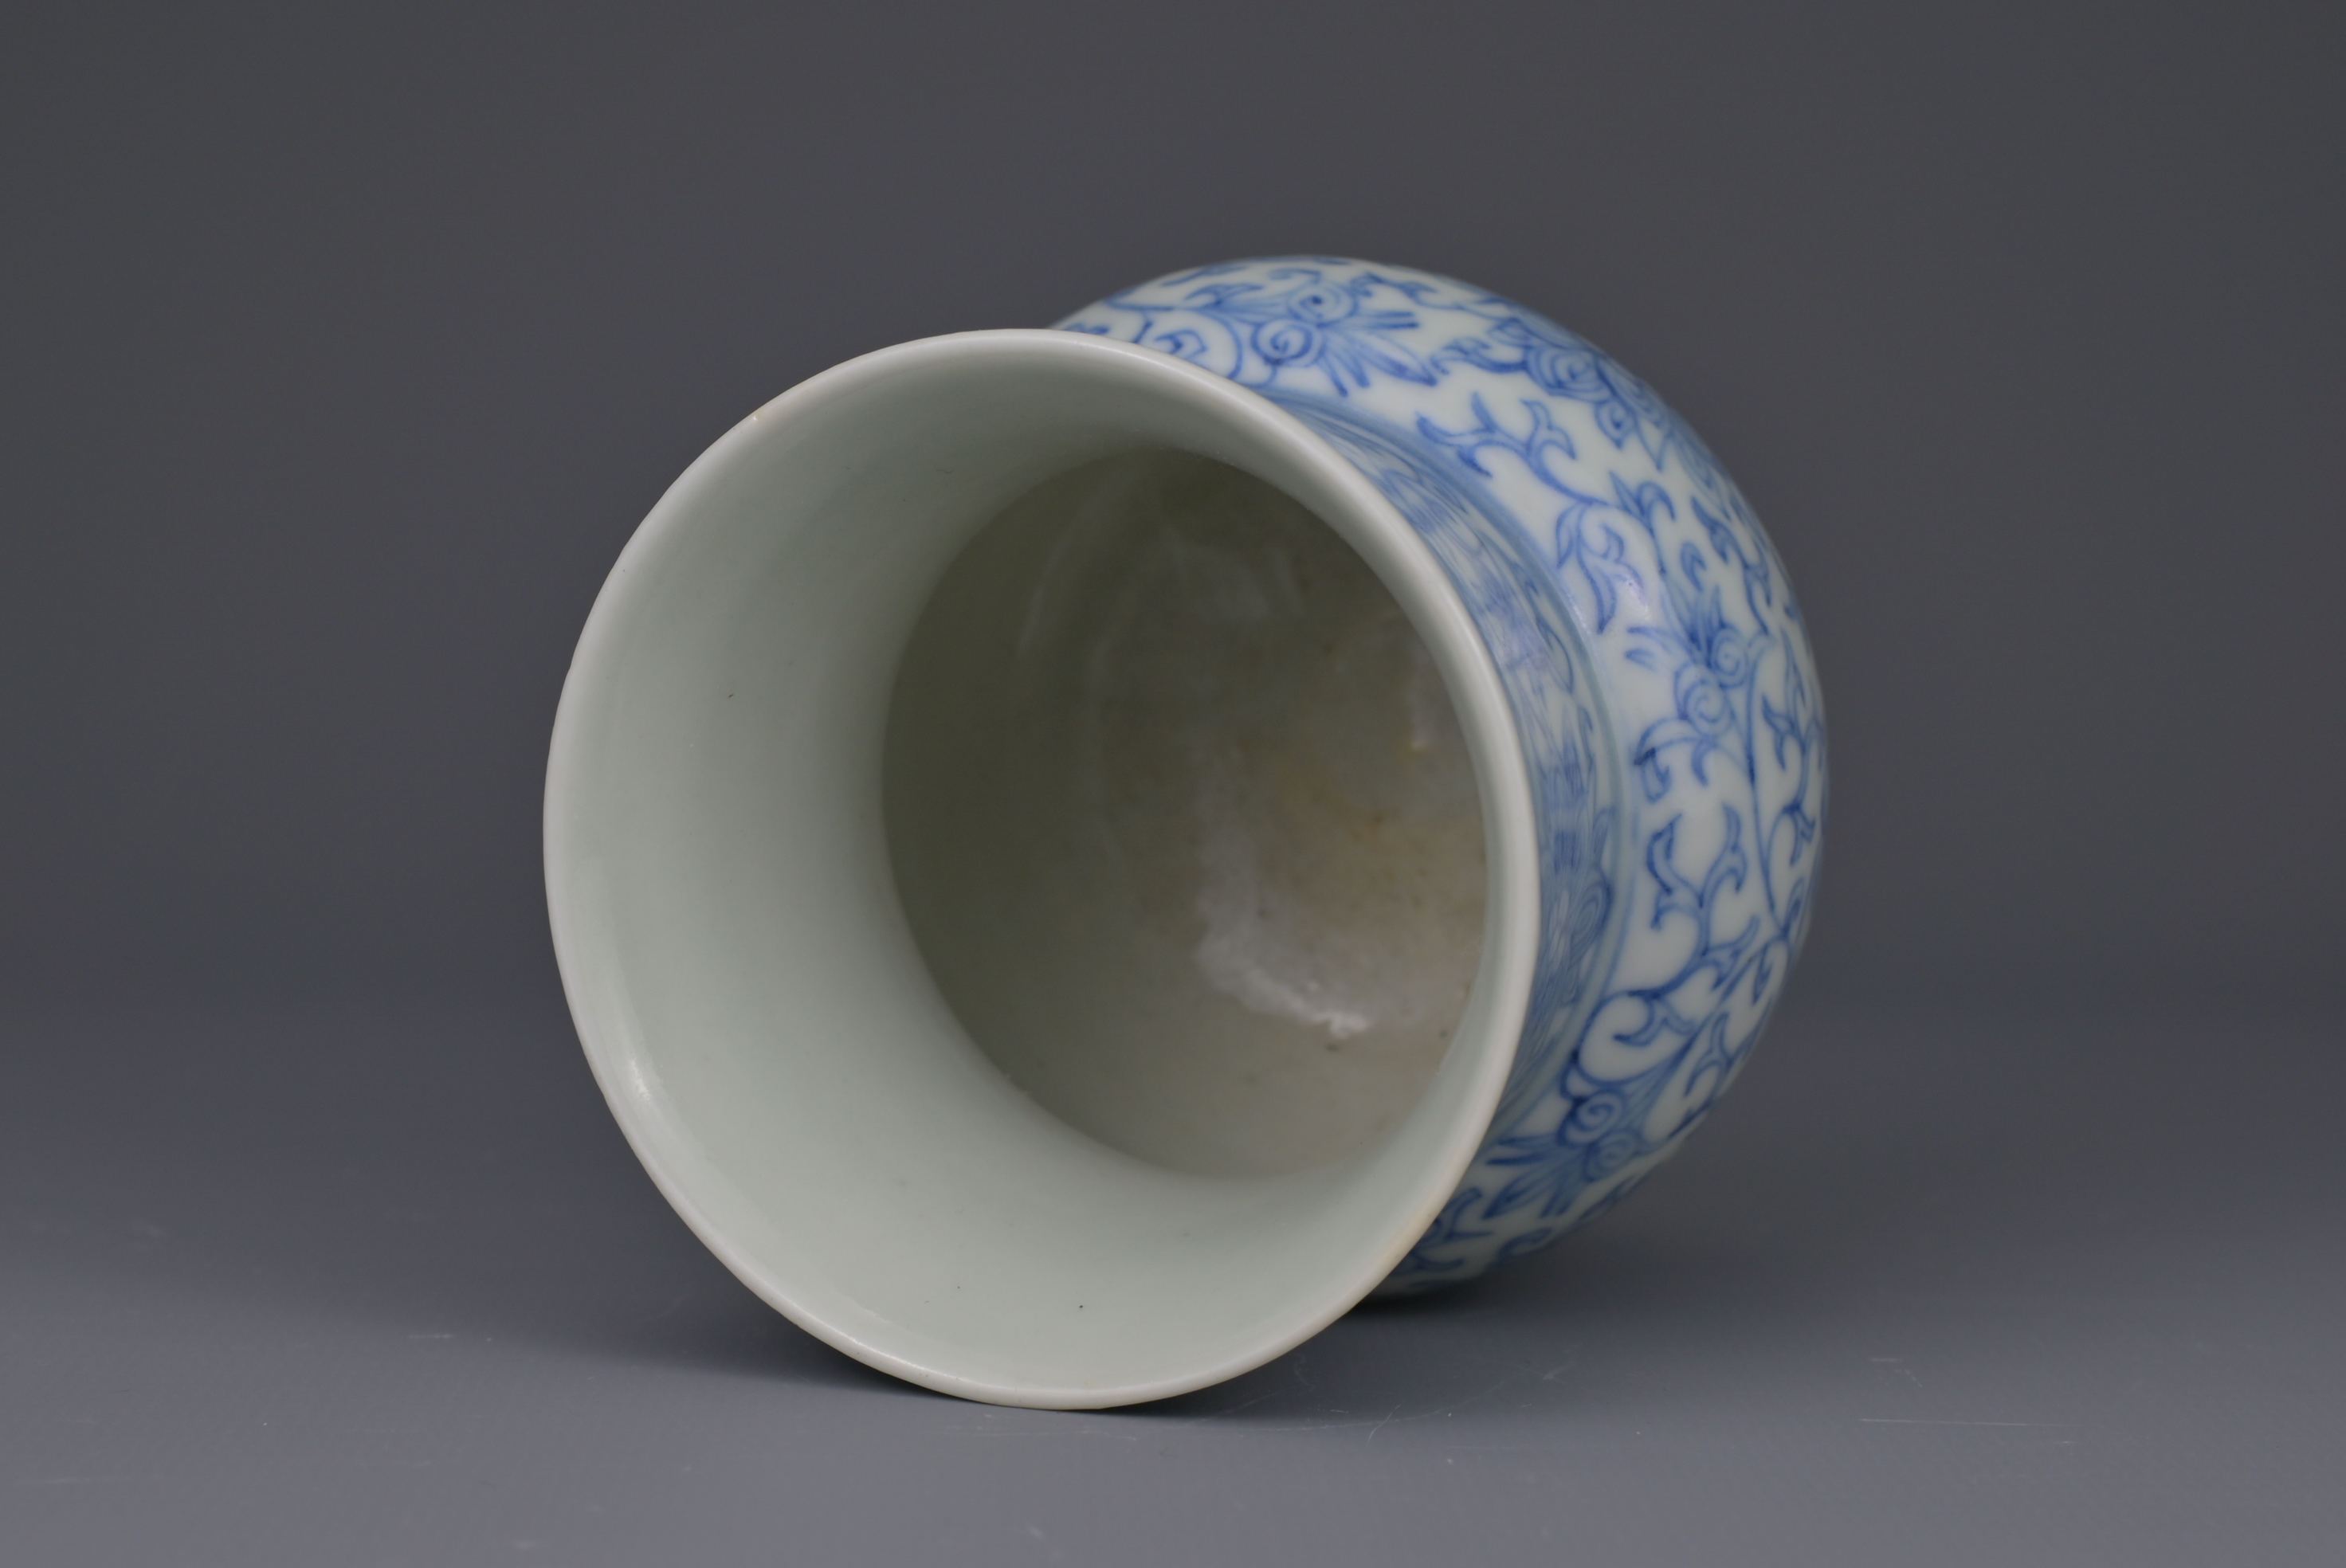 CHINESE BLUE AND WHITE PORCELAIN SPITTOON ‘ZHADOU’, JIAQING PERIOD, EARLY 19th CENTURY - Image 7 of 8